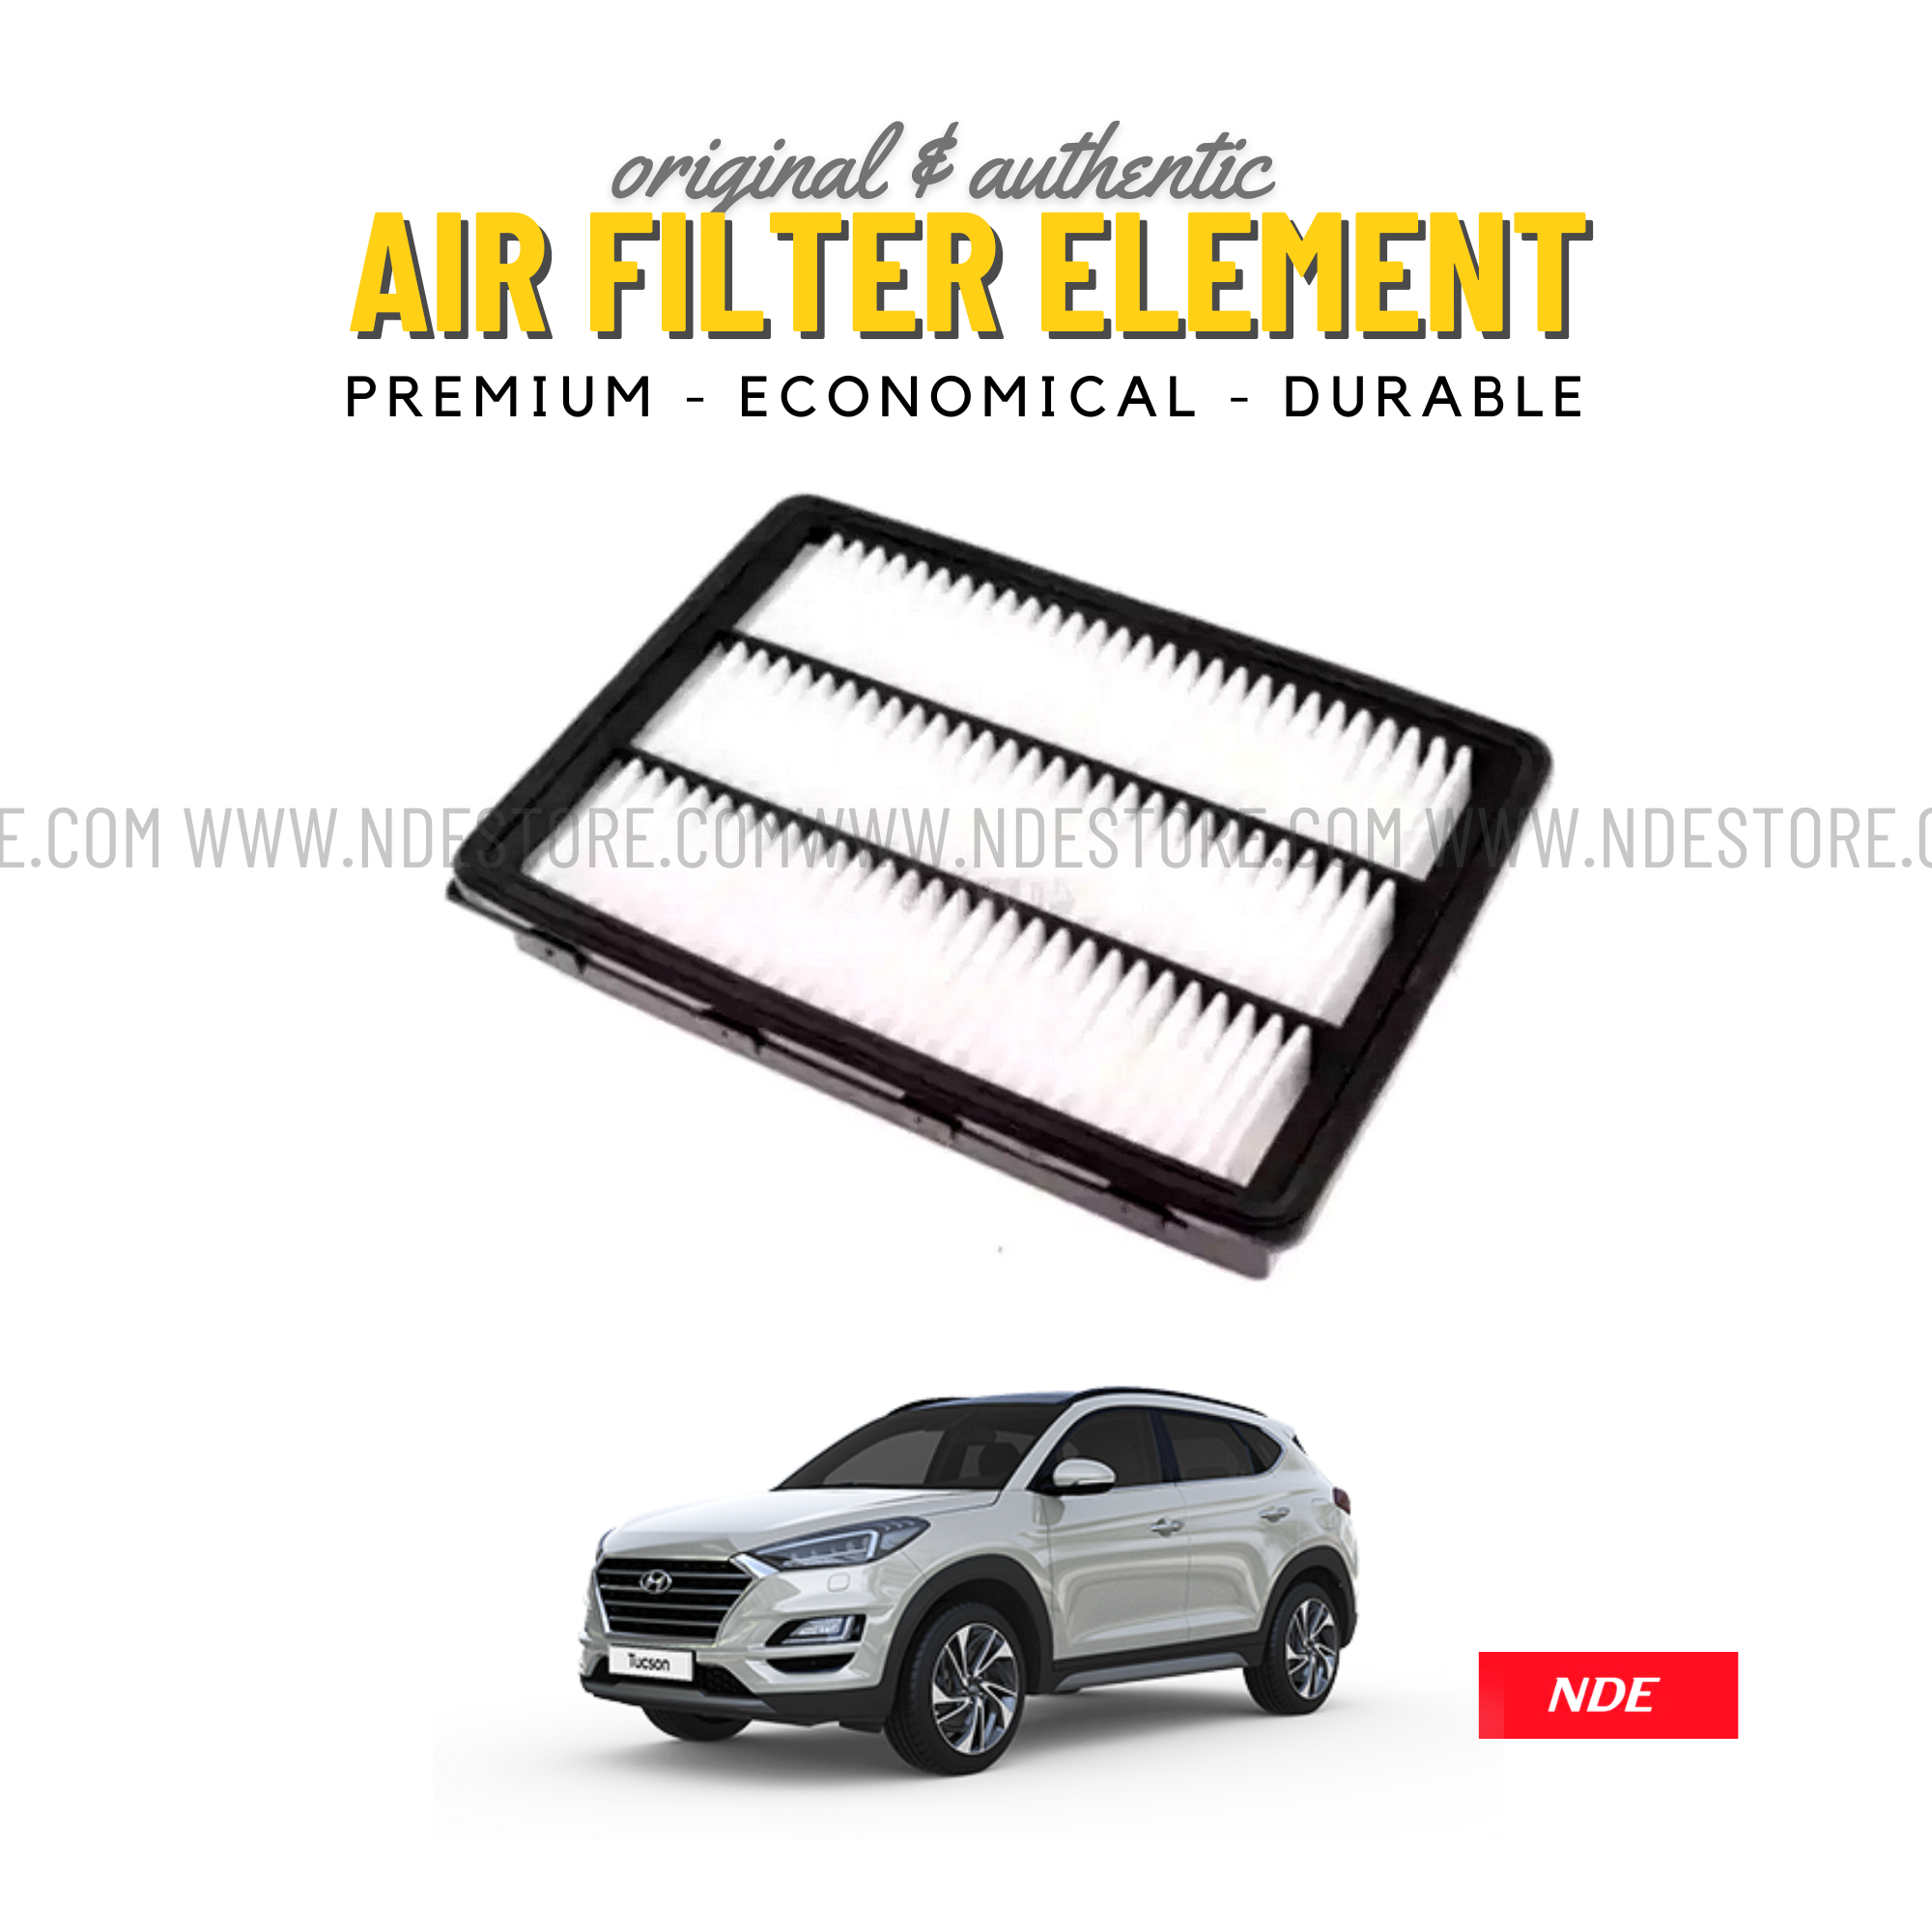 AIR FILTER ELEMENT SUB ASSY FOR HYUNDAI TUCSON (IMPORTED)